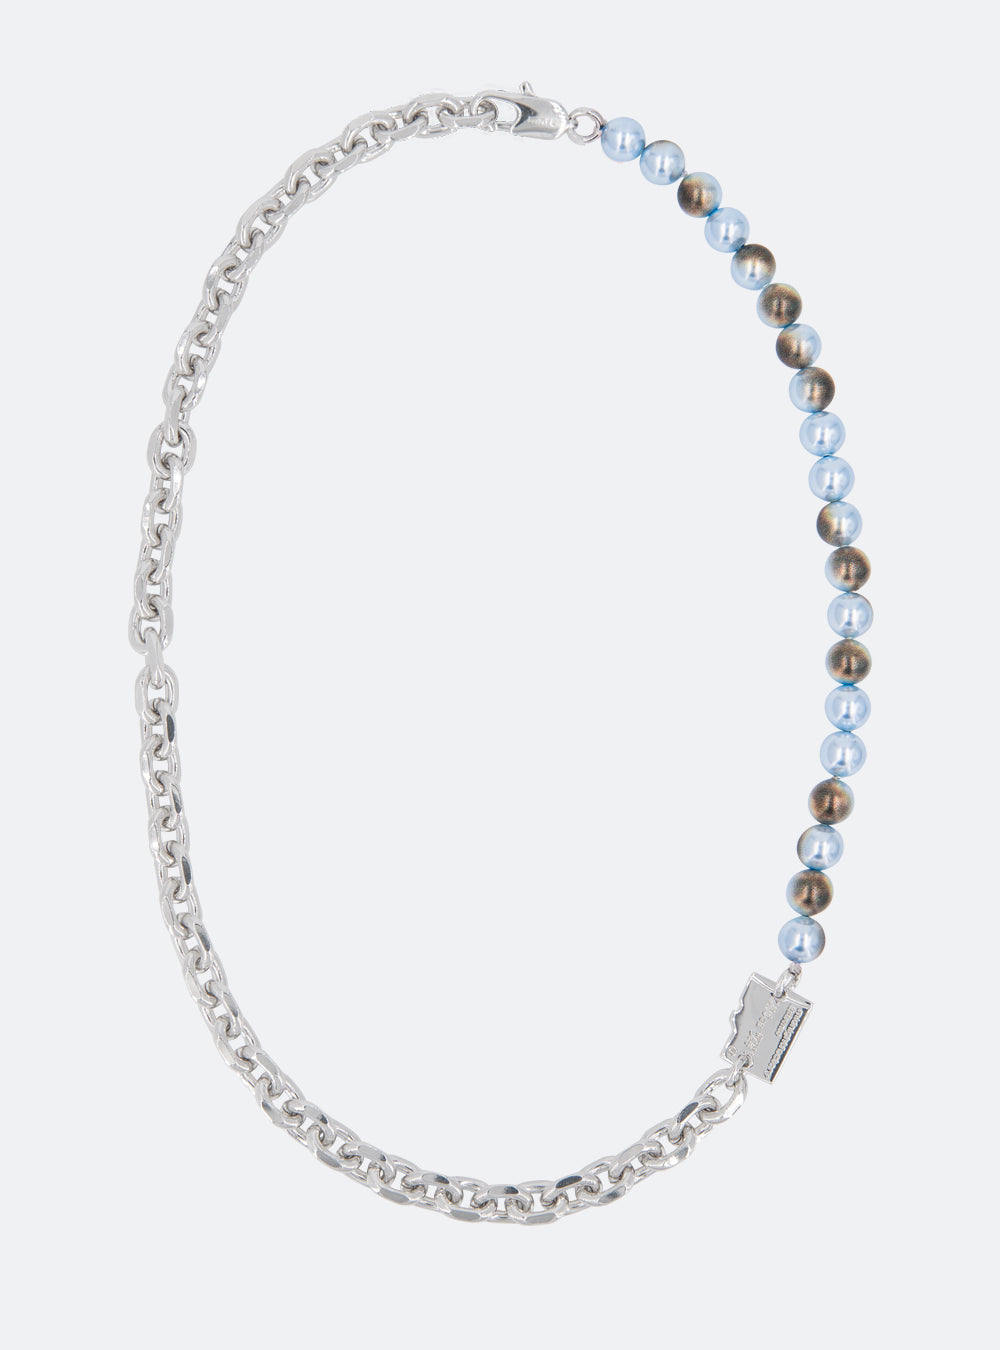 A Micro-SD sky-blue burnt pearls necklace with an adjustable length chain by MIDNIGHTFACTORY.